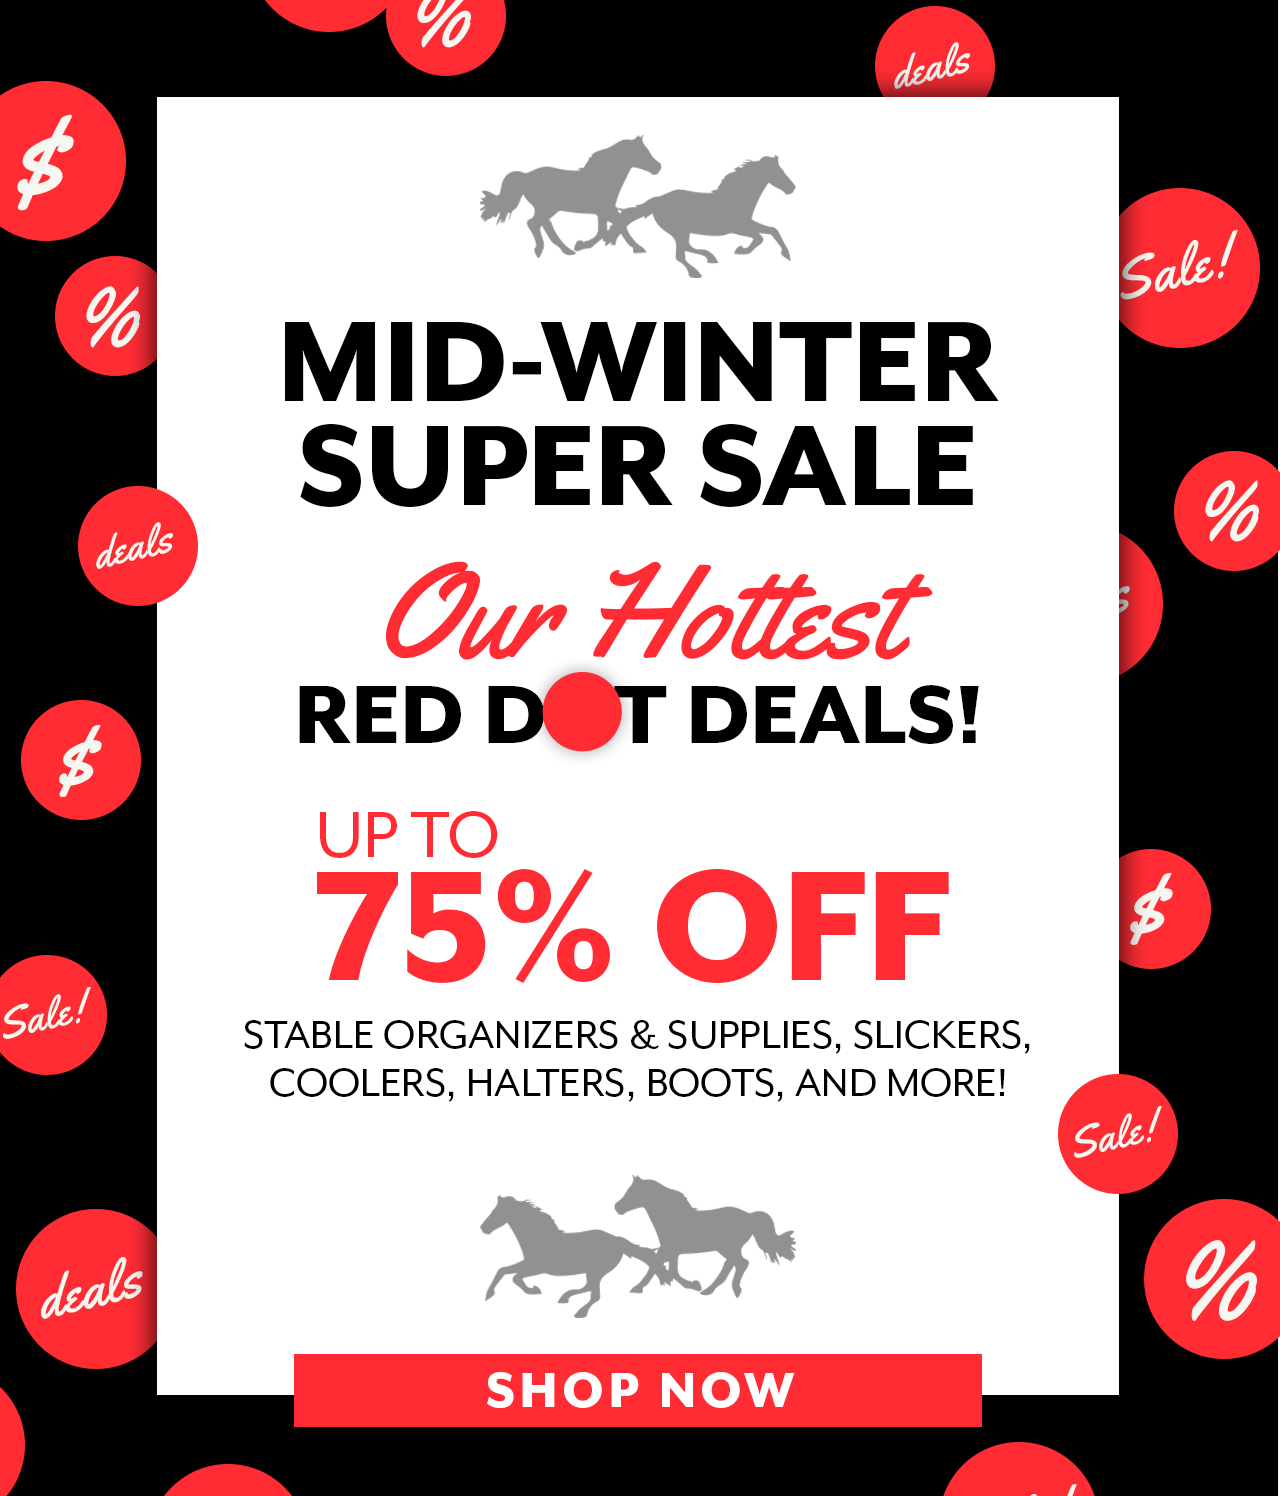 Our Mid-Winter Super Sale is happening now!